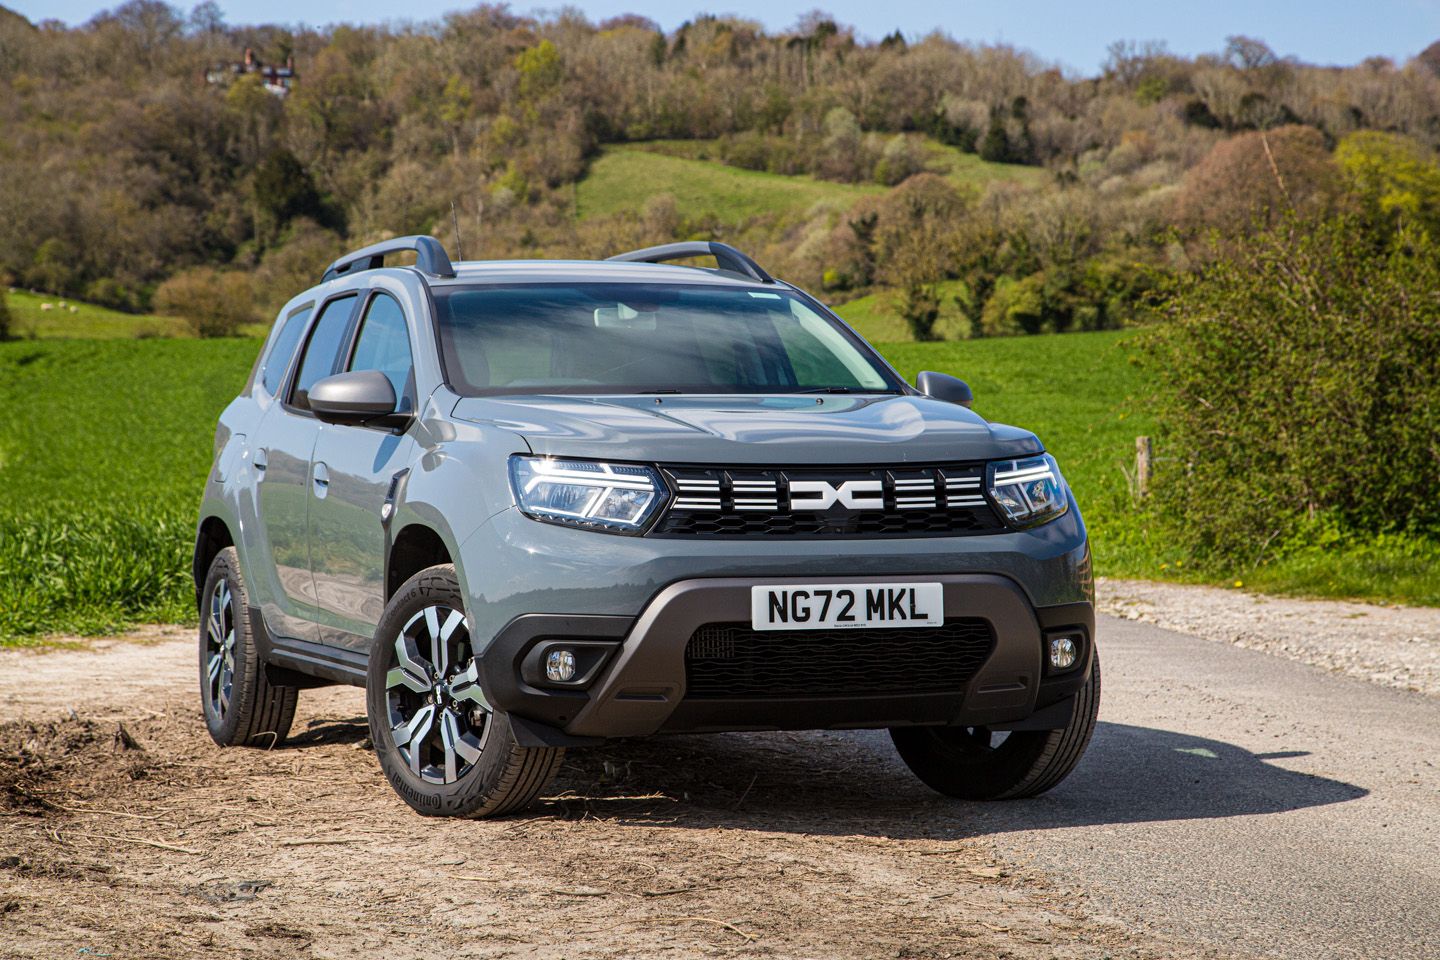 New Dacia Duster Phase 2 SUV offers more